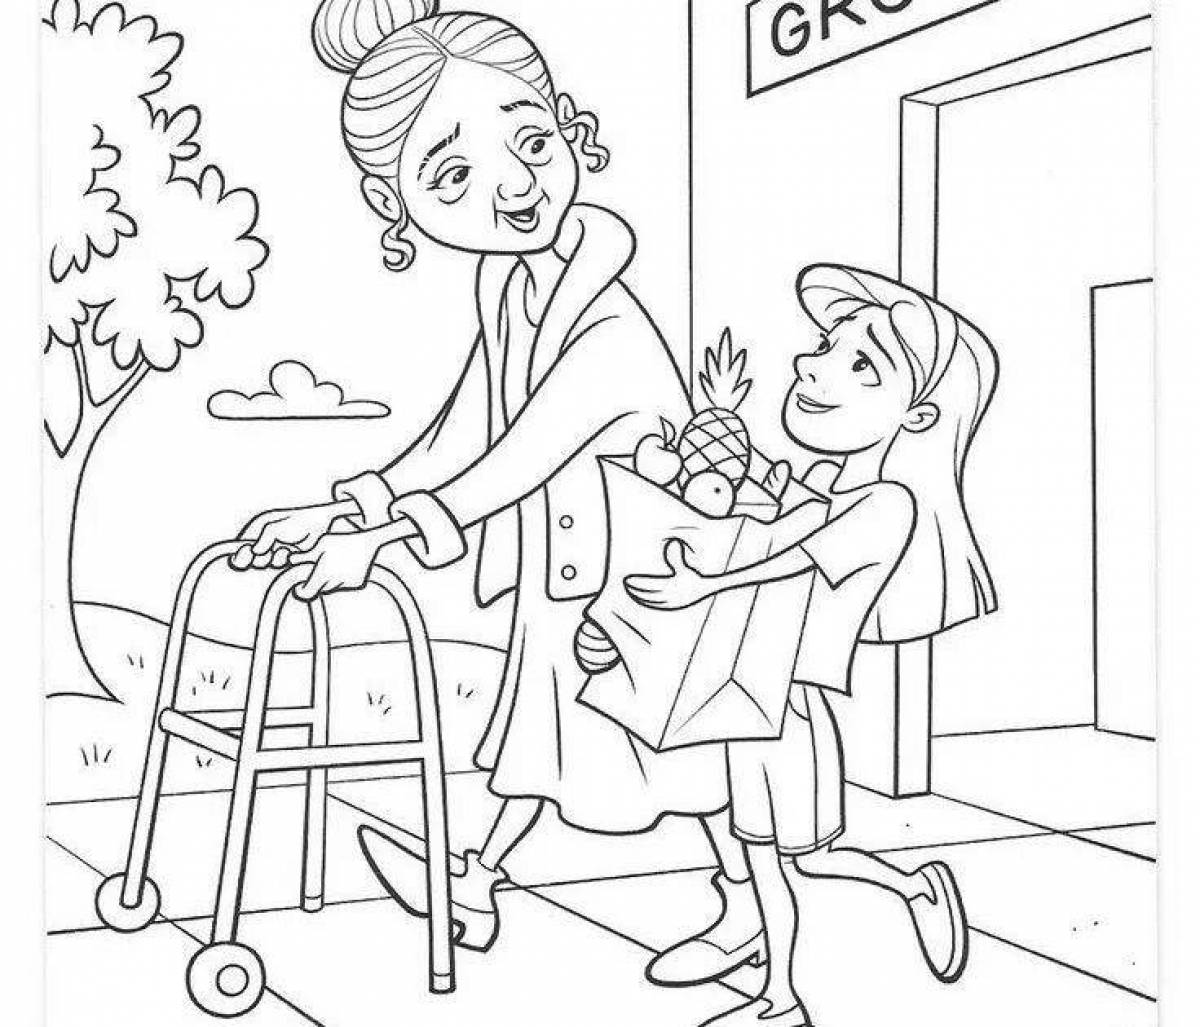 Pleasant deeds for kids coloring book